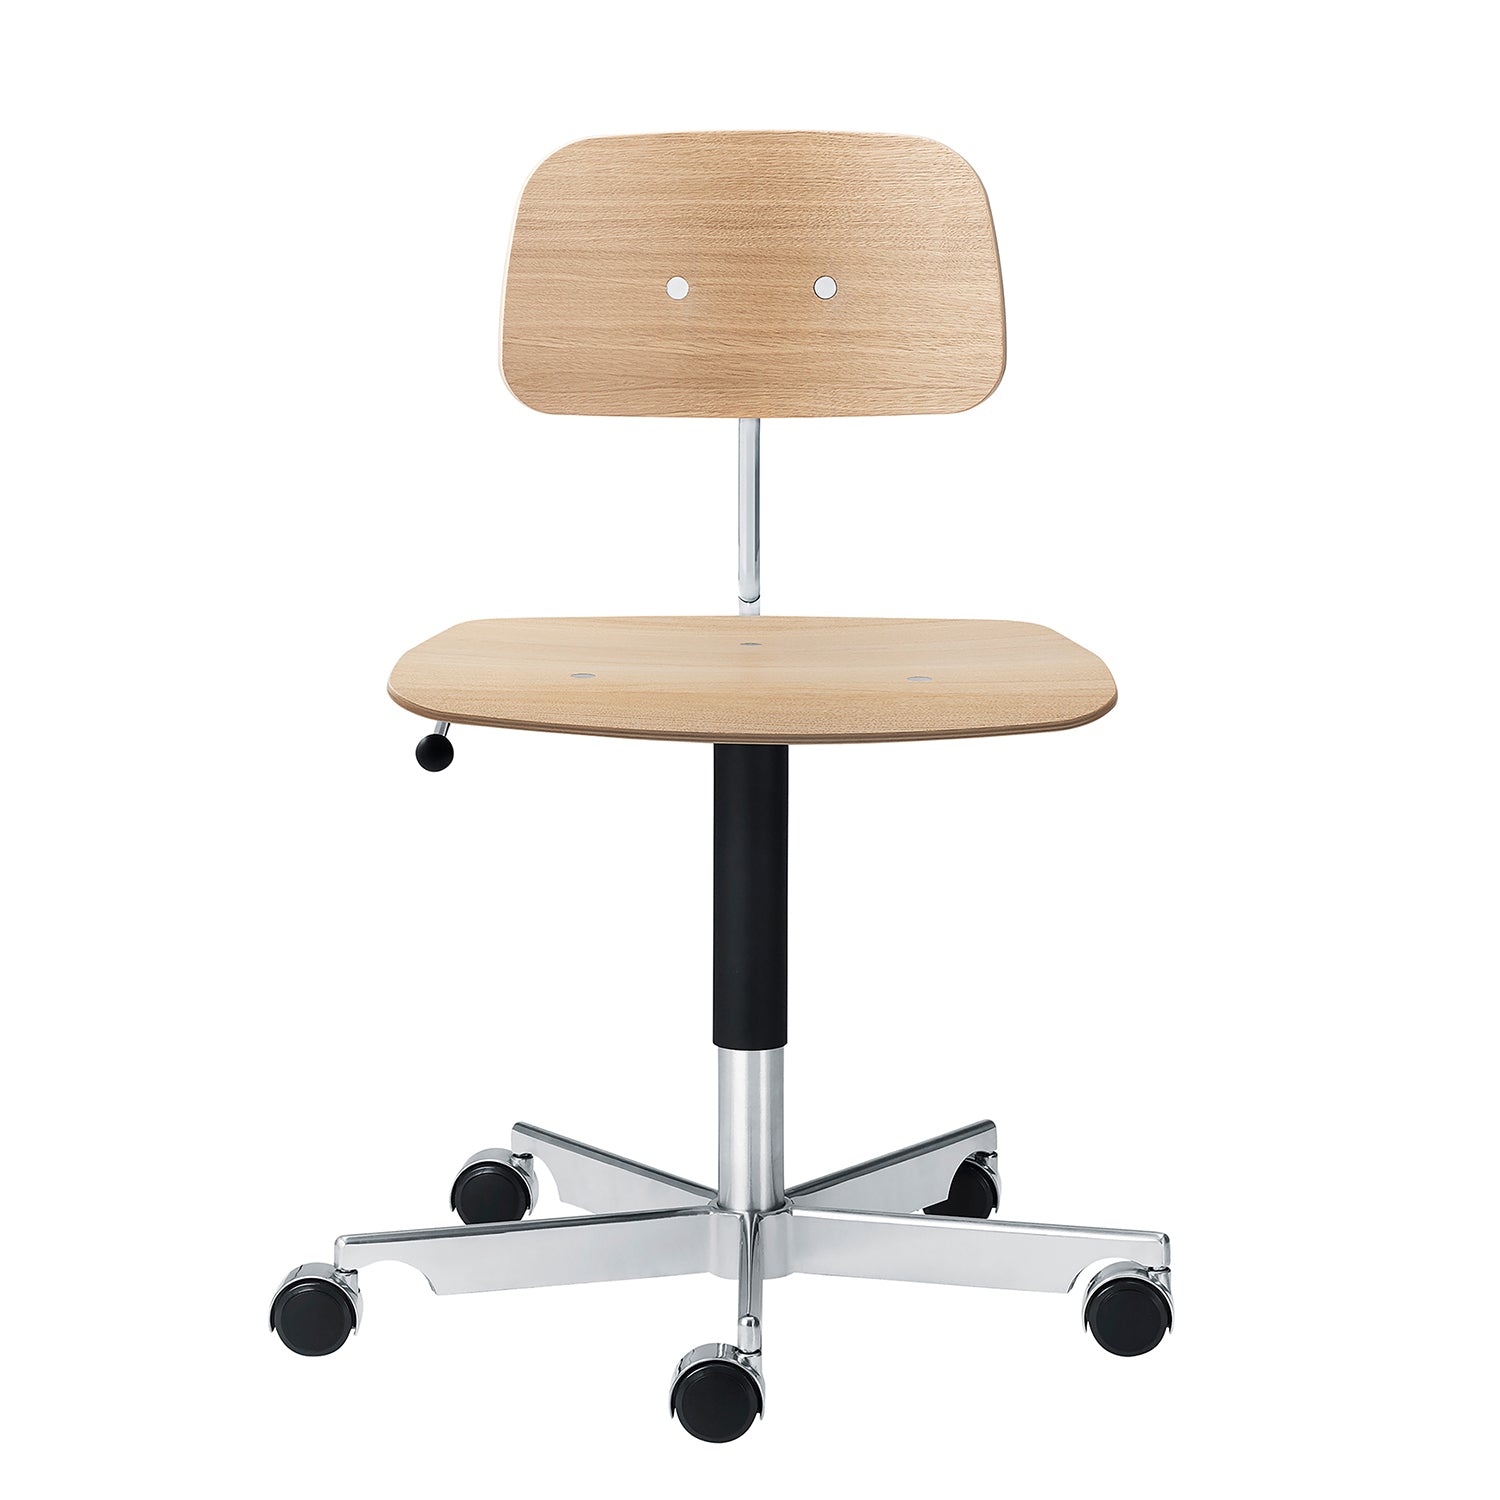 Kevi Chair 2533: Wood | Buy Engelbrechts online at A+R